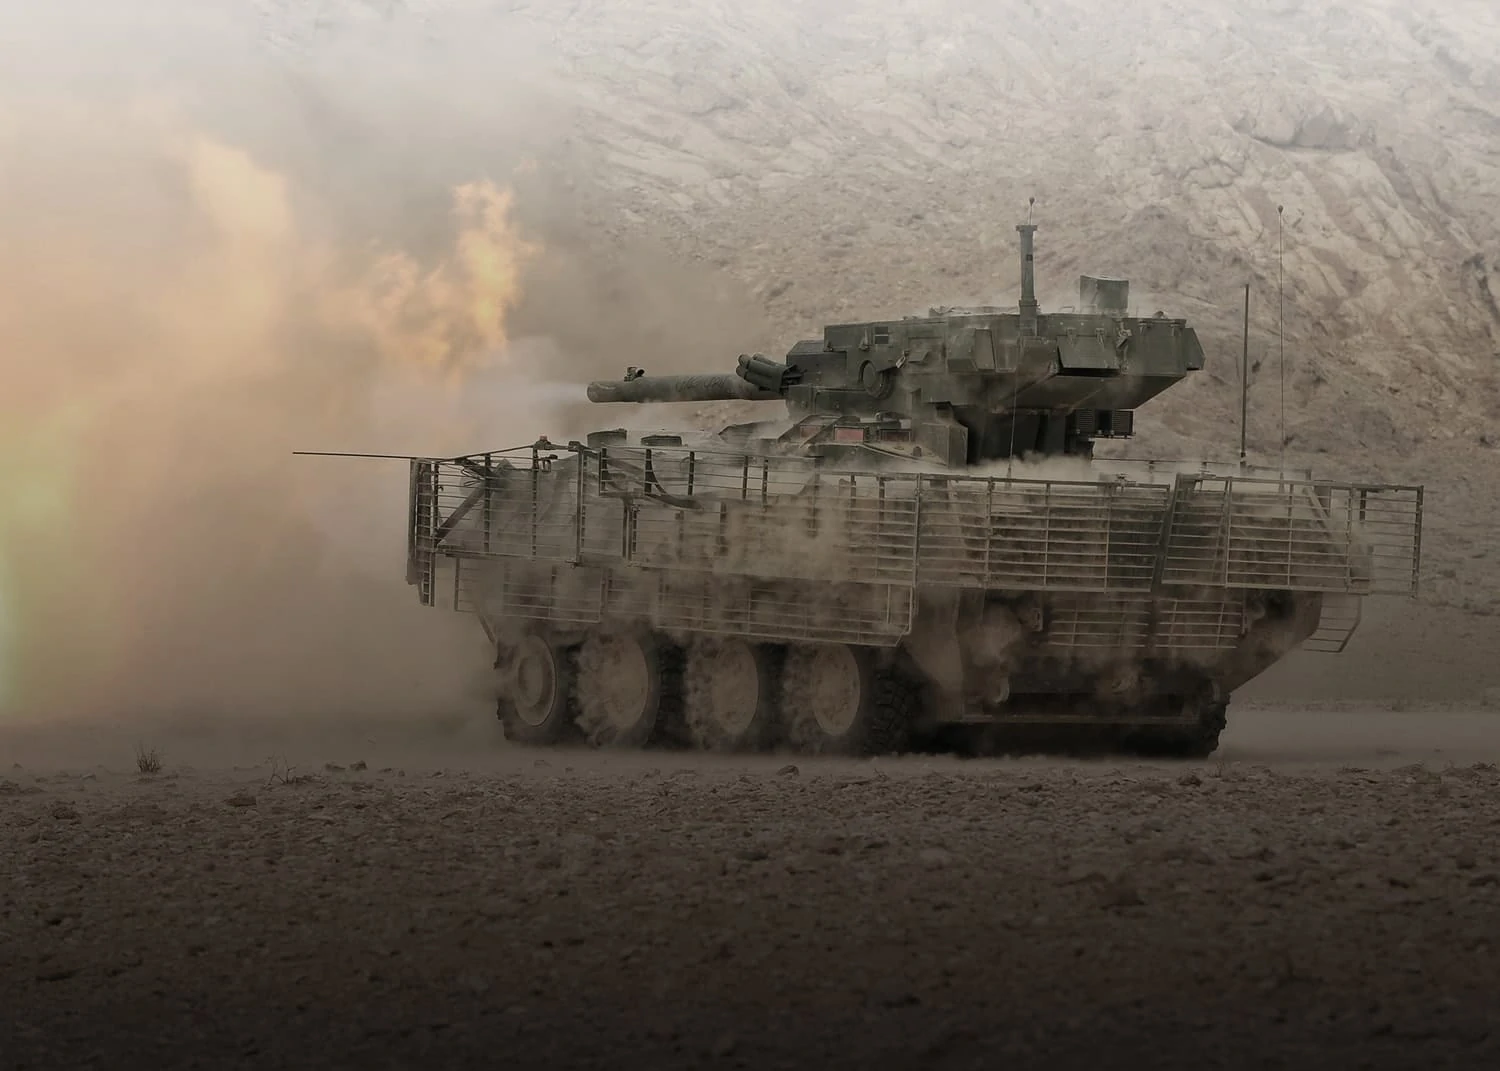 tank firing a volley in the dust